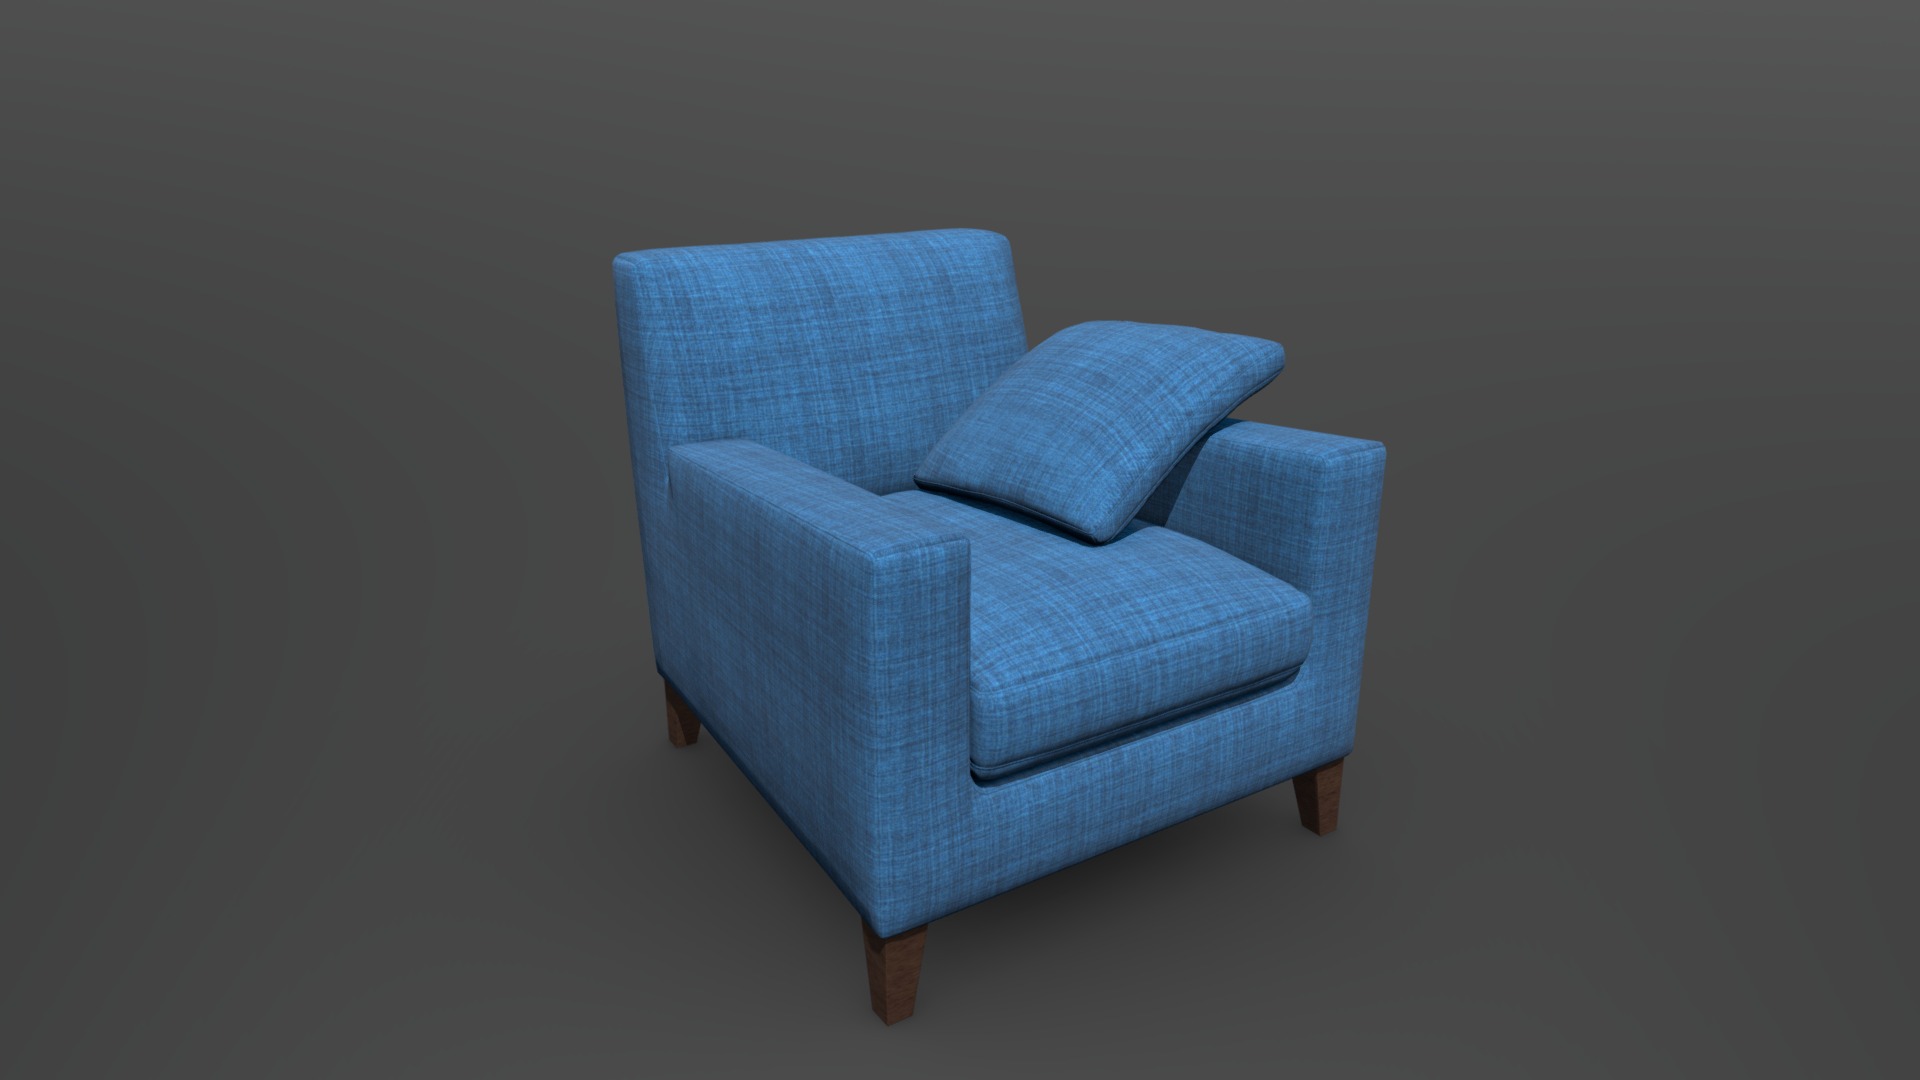 3D model Sofa_with_GLTF_USDZ_AR_KIT - This is a 3D model of the Sofa_with_GLTF_USDZ_AR_KIT. The 3D model is about a blue couch with a cushion.